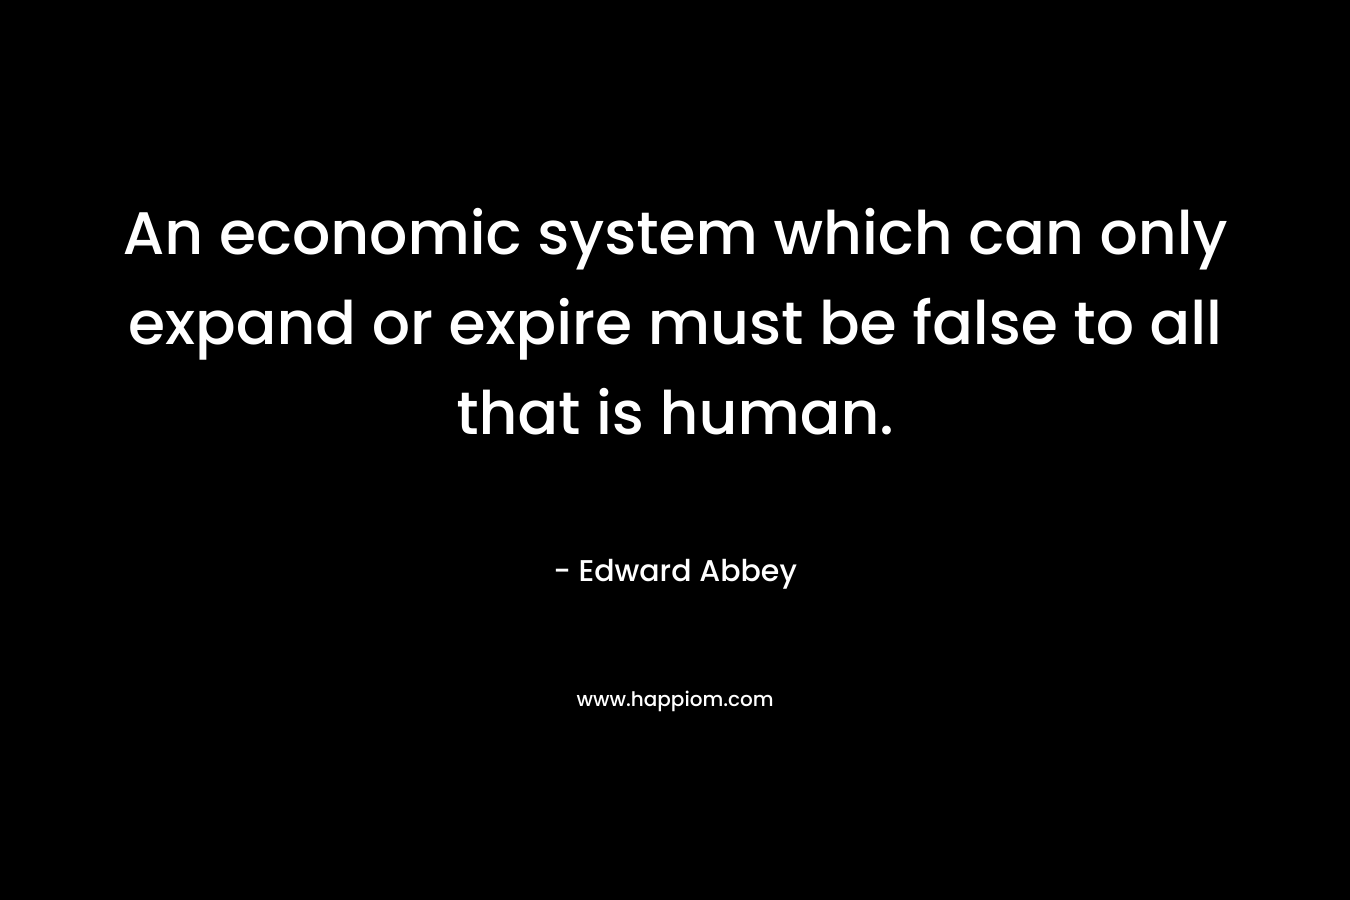 An economic system which can only expand or expire must be false to all that is human.